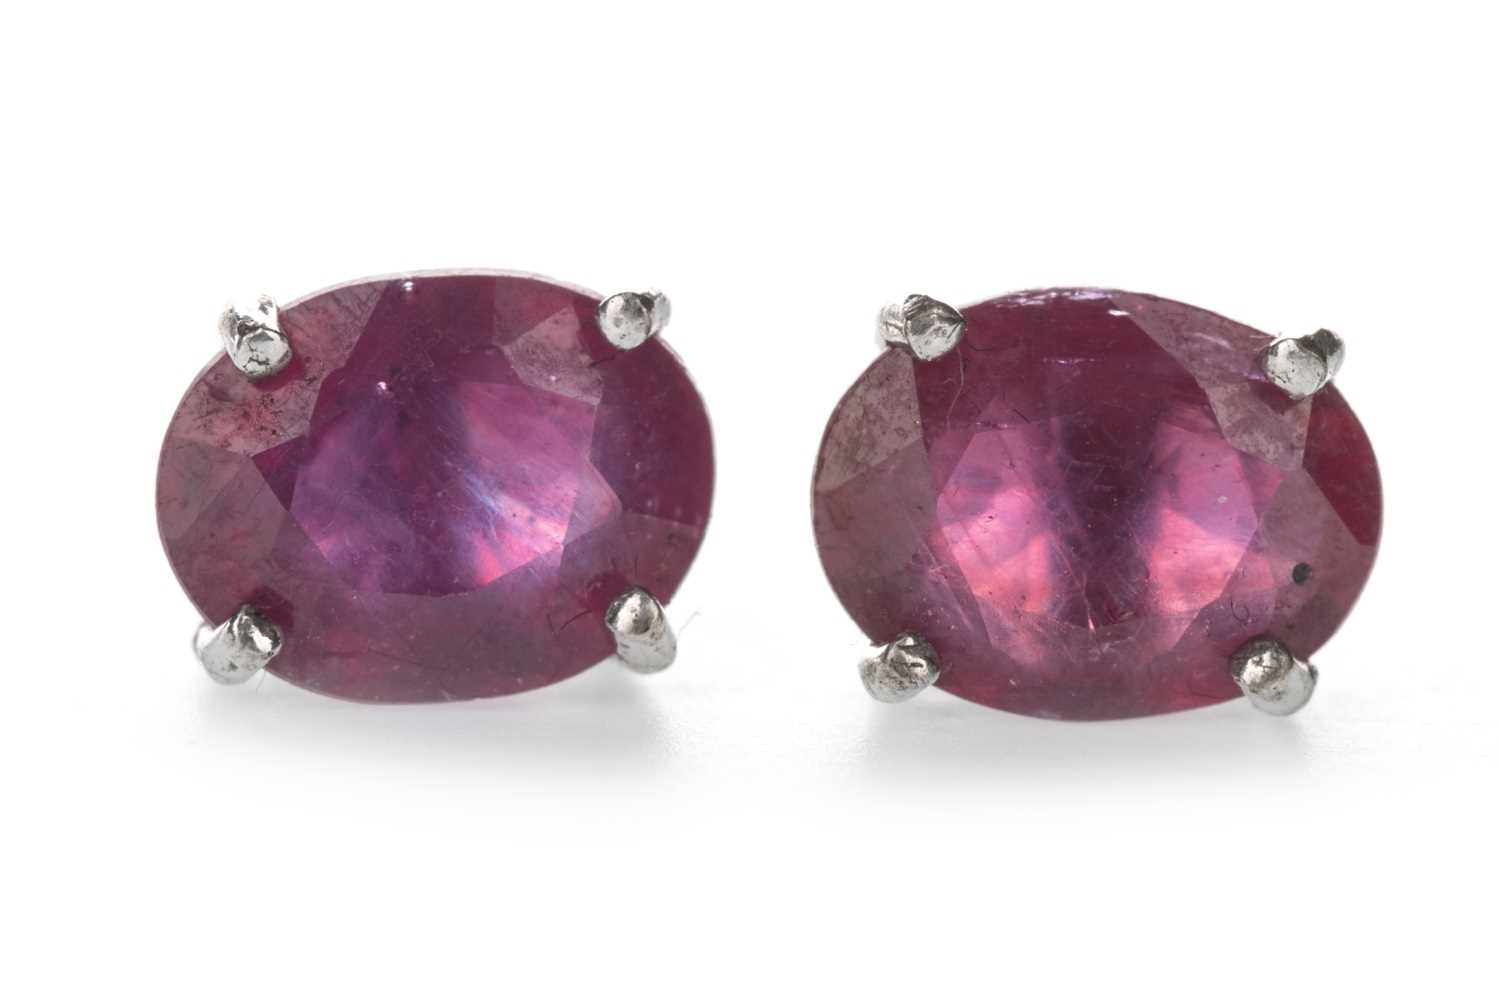 Lot 444 - A PAIR OF TREATED RUBY EARRINGS